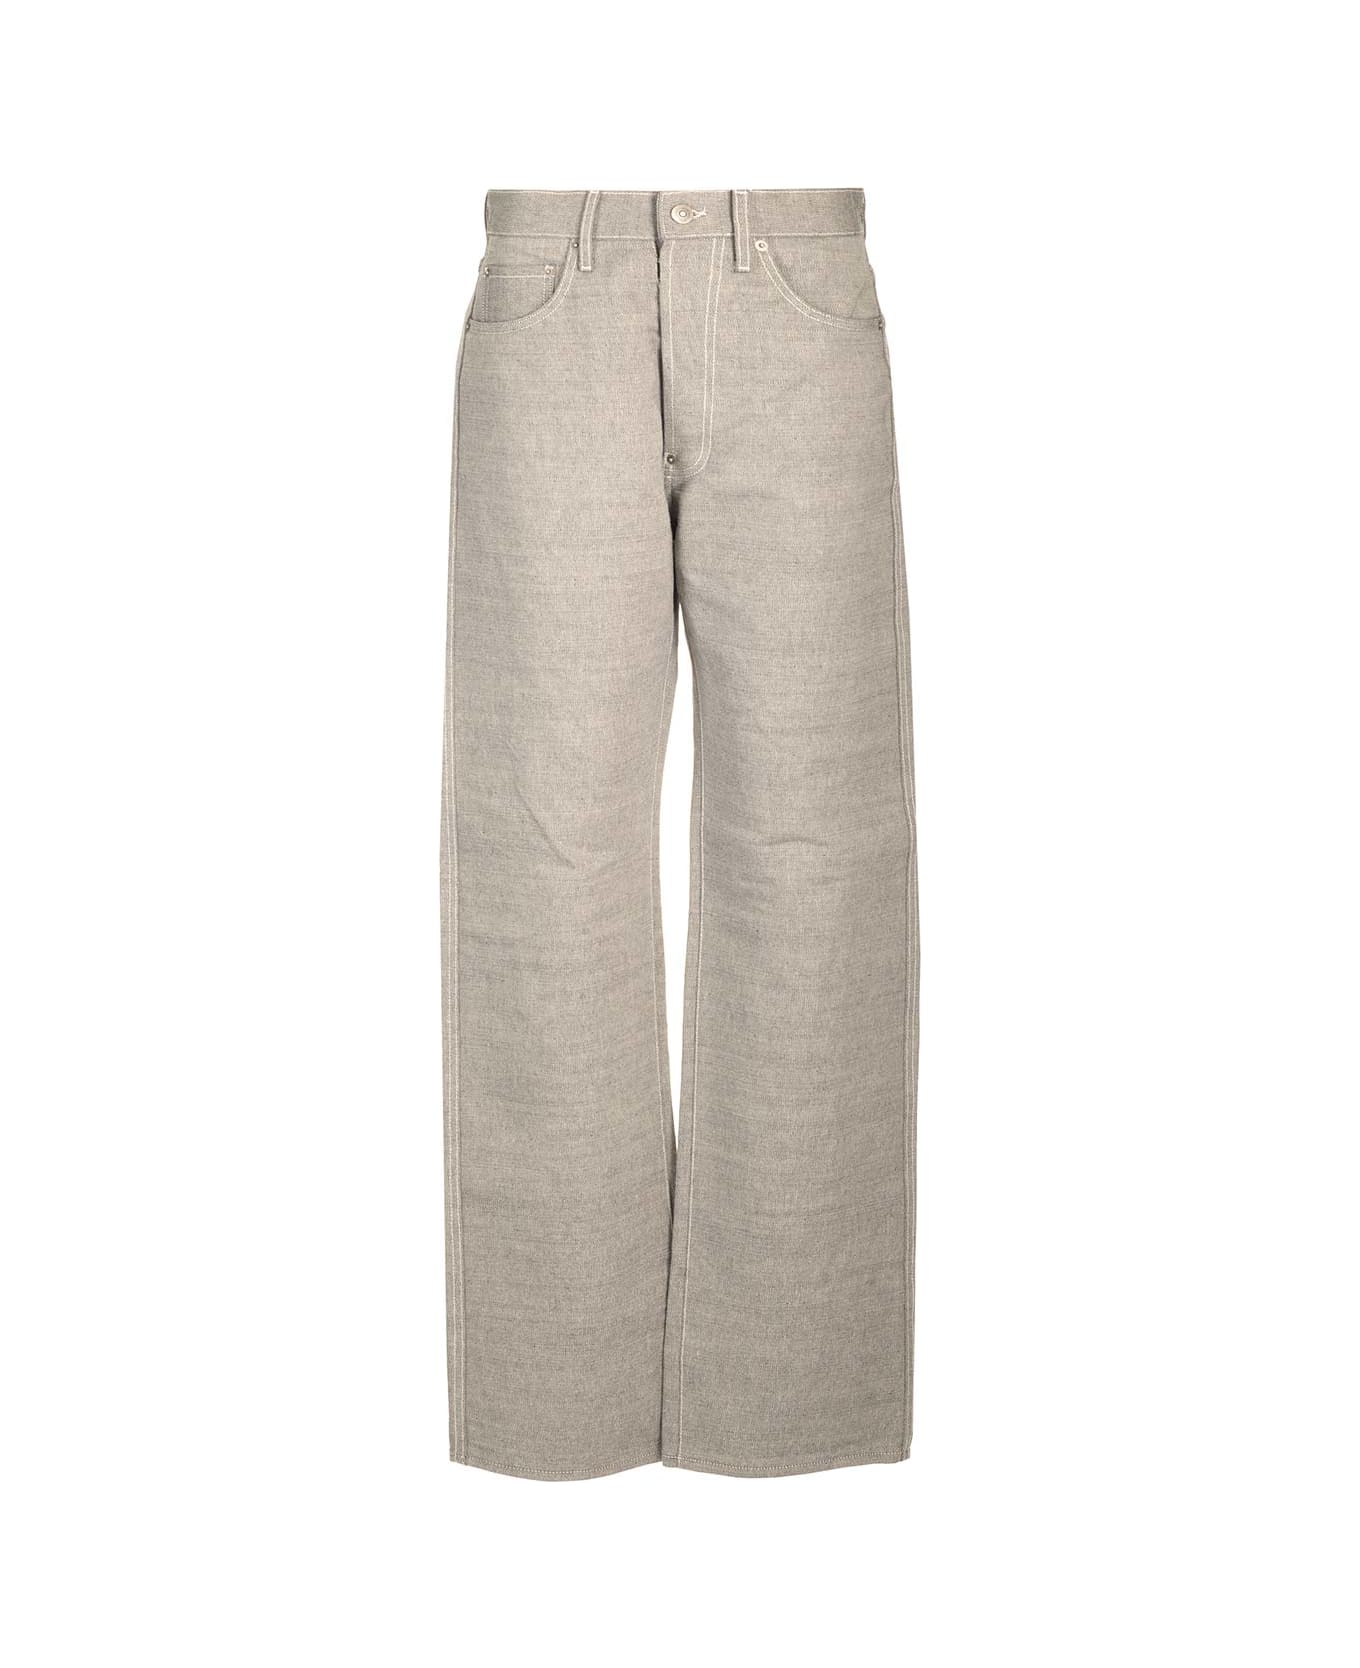 Maison Margiela Straight Buttoned Jeans - Grey ボトムス